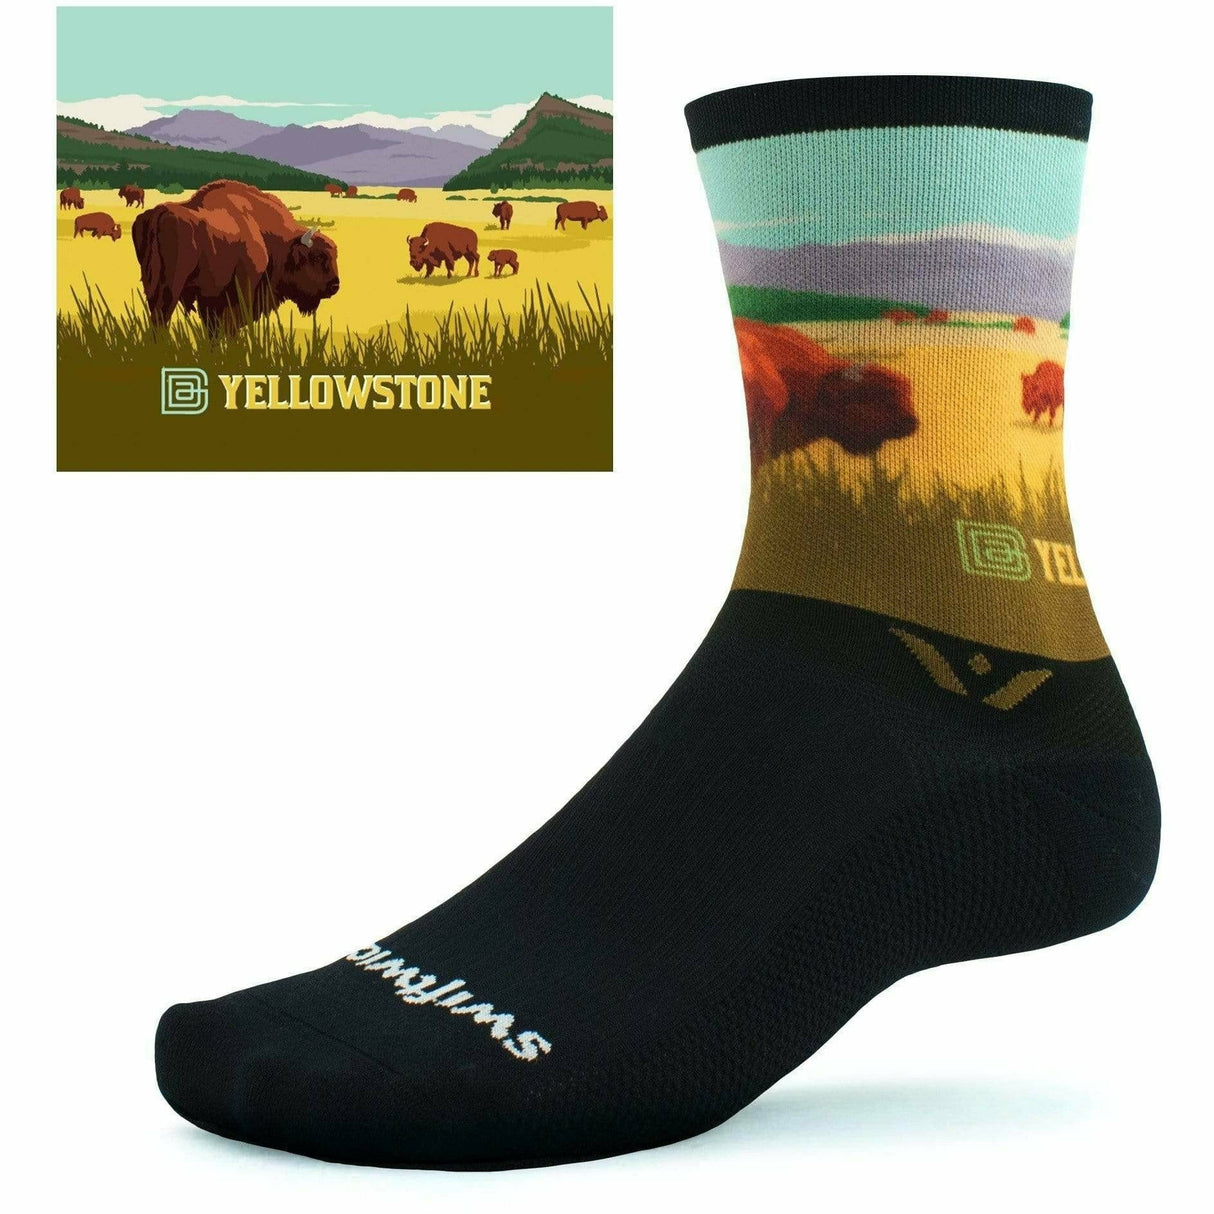 Swiftwick Vision Six Impression National Parks Collection Crew Socks  -  Small / Yellowstone Bison